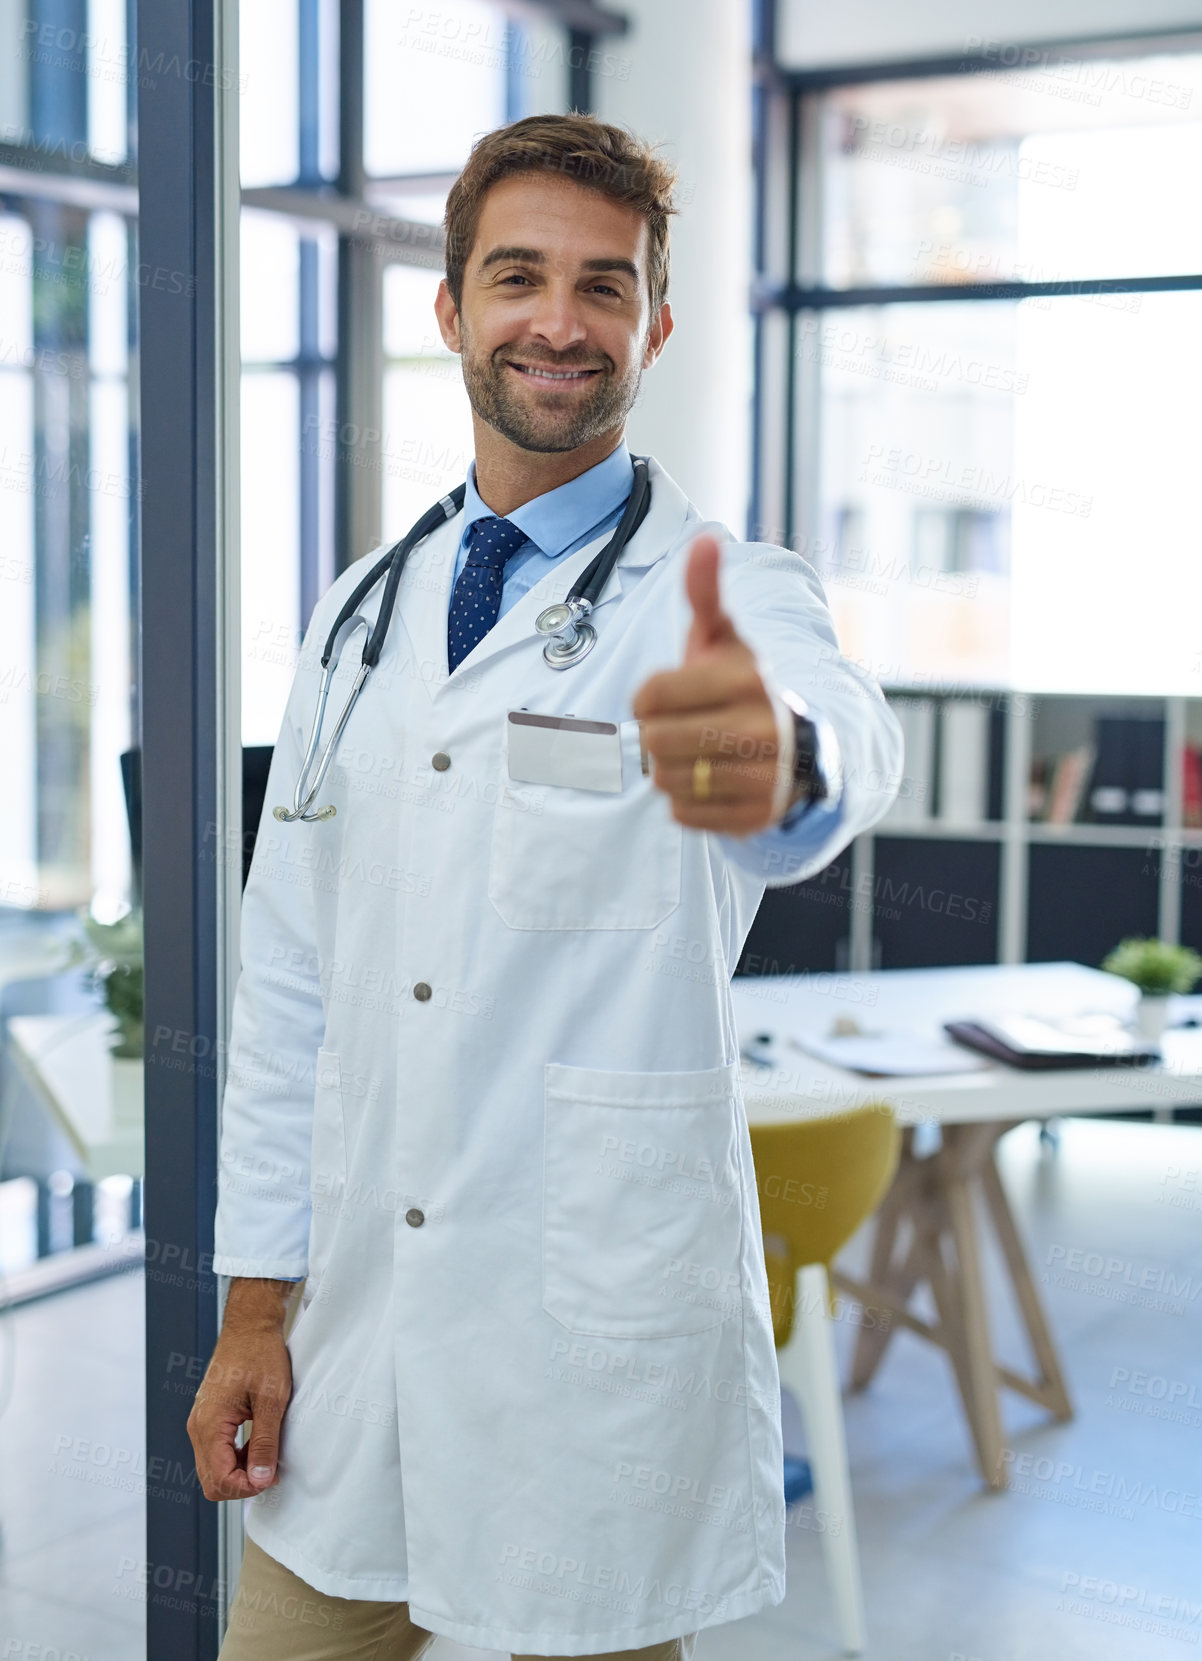 Buy stock photo Portrait of a young doctor showing thumbs up in his office